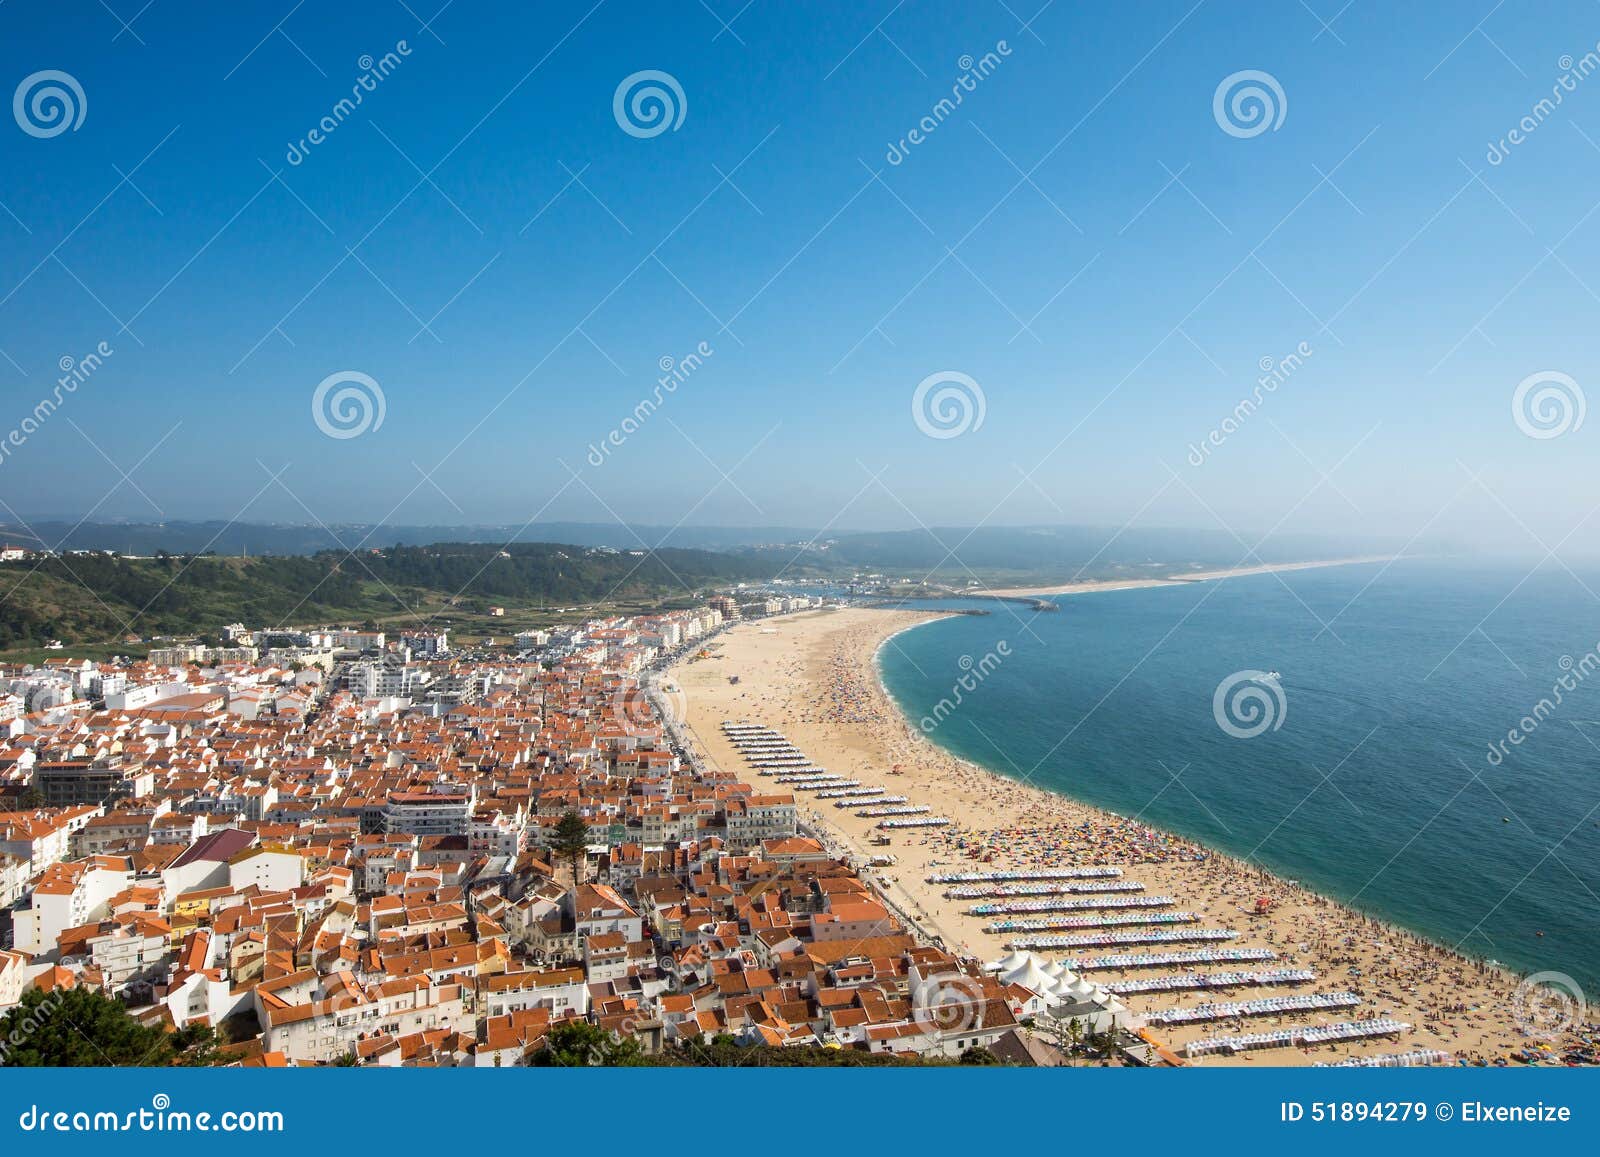 nazare with the beach in portugal